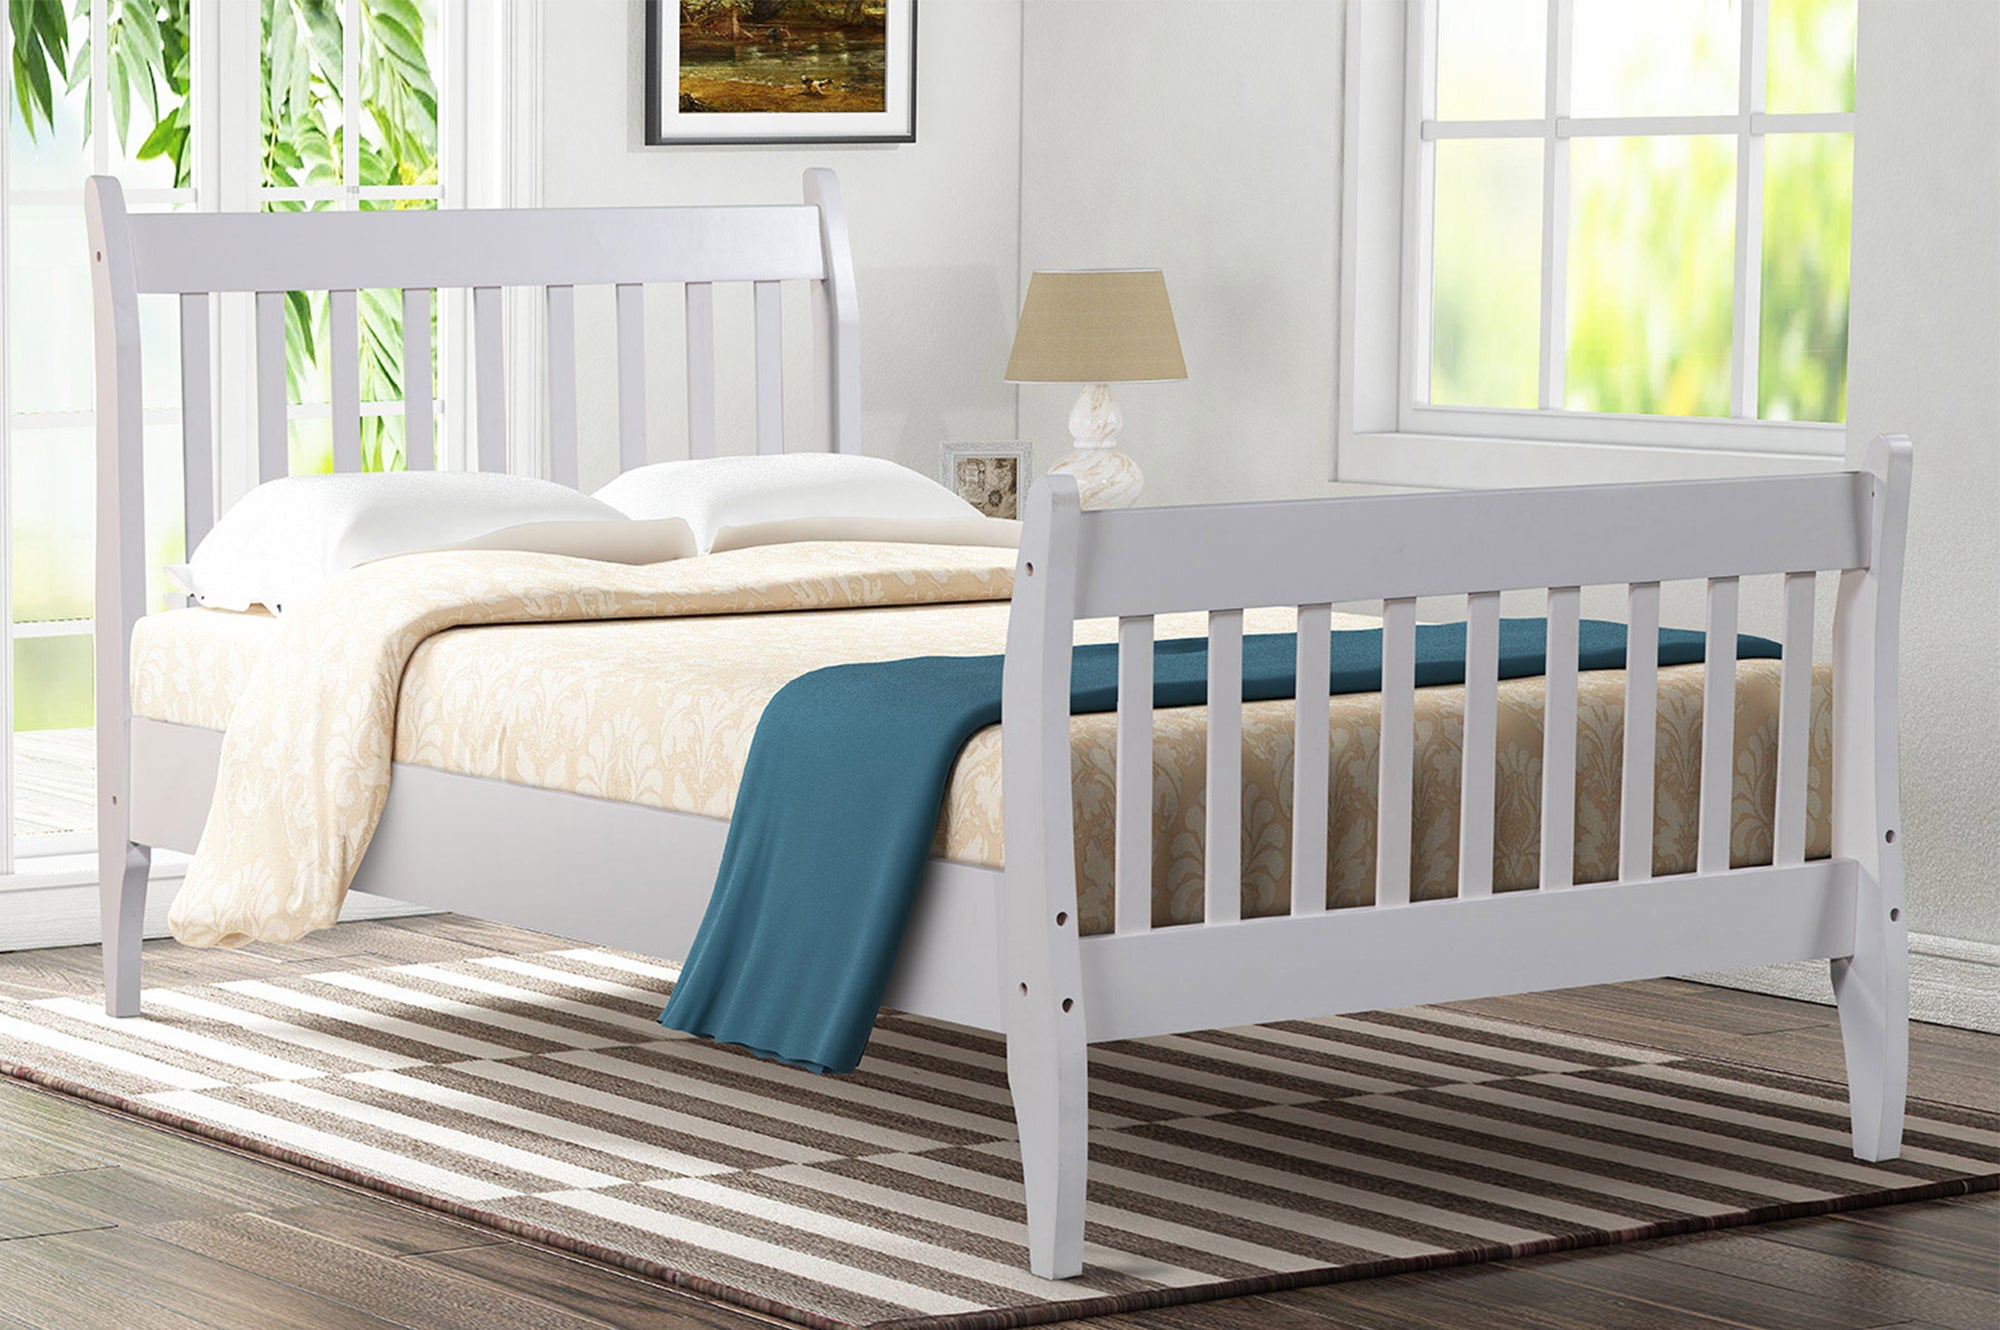 Twin White Platform Bed Frame Mattress Foundation with Wood Slat By: Alabama Beds